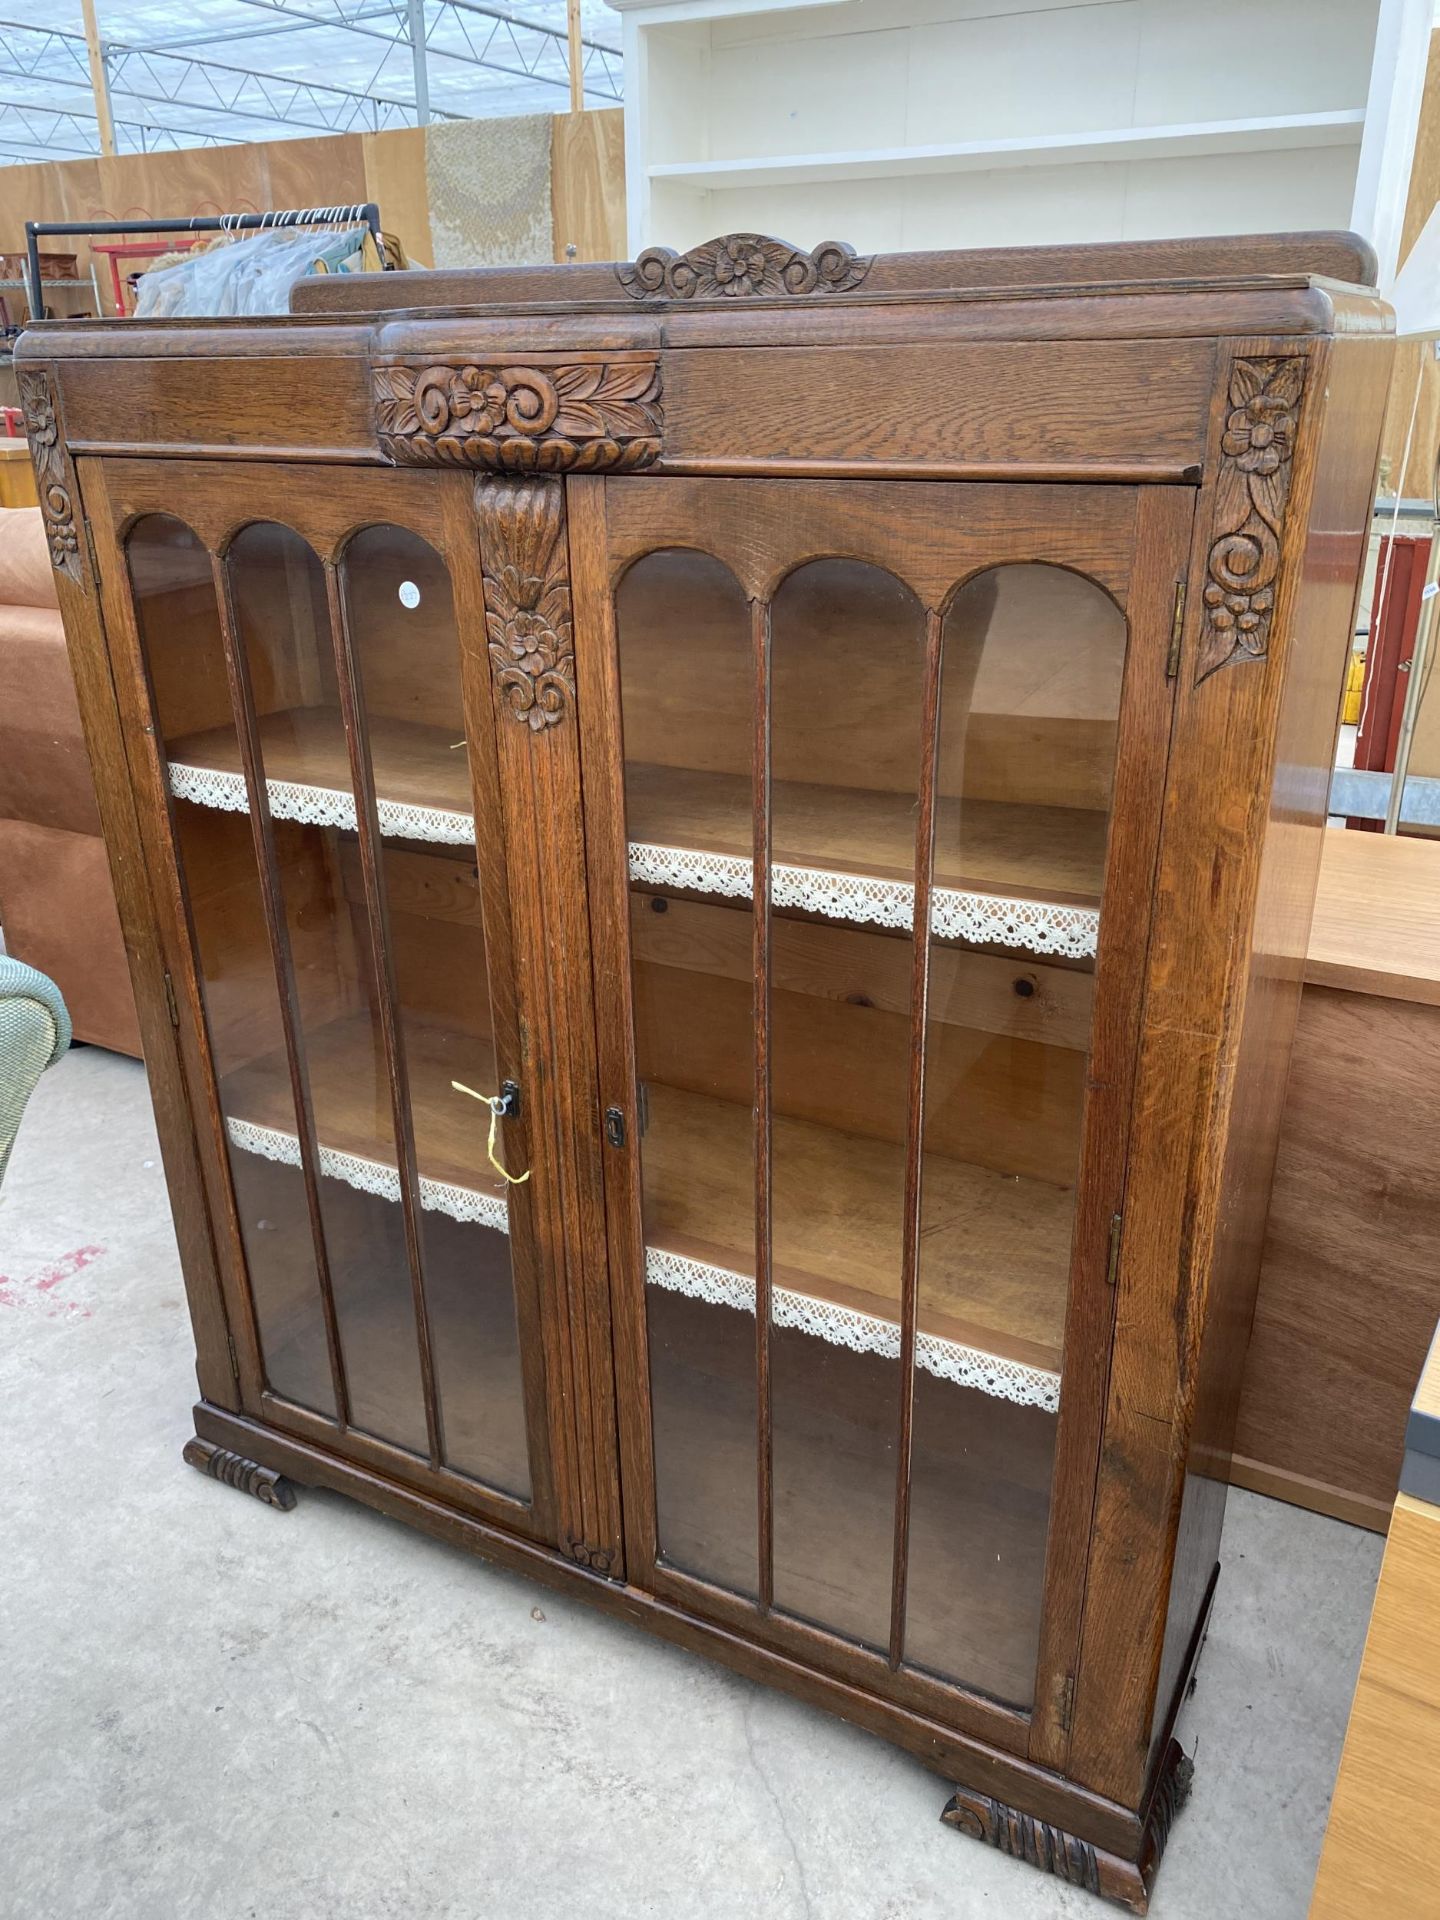 AN EARLY 20TH CENTURY OAK TWO DOOR DISPLAY CABINET, 40" WIDE